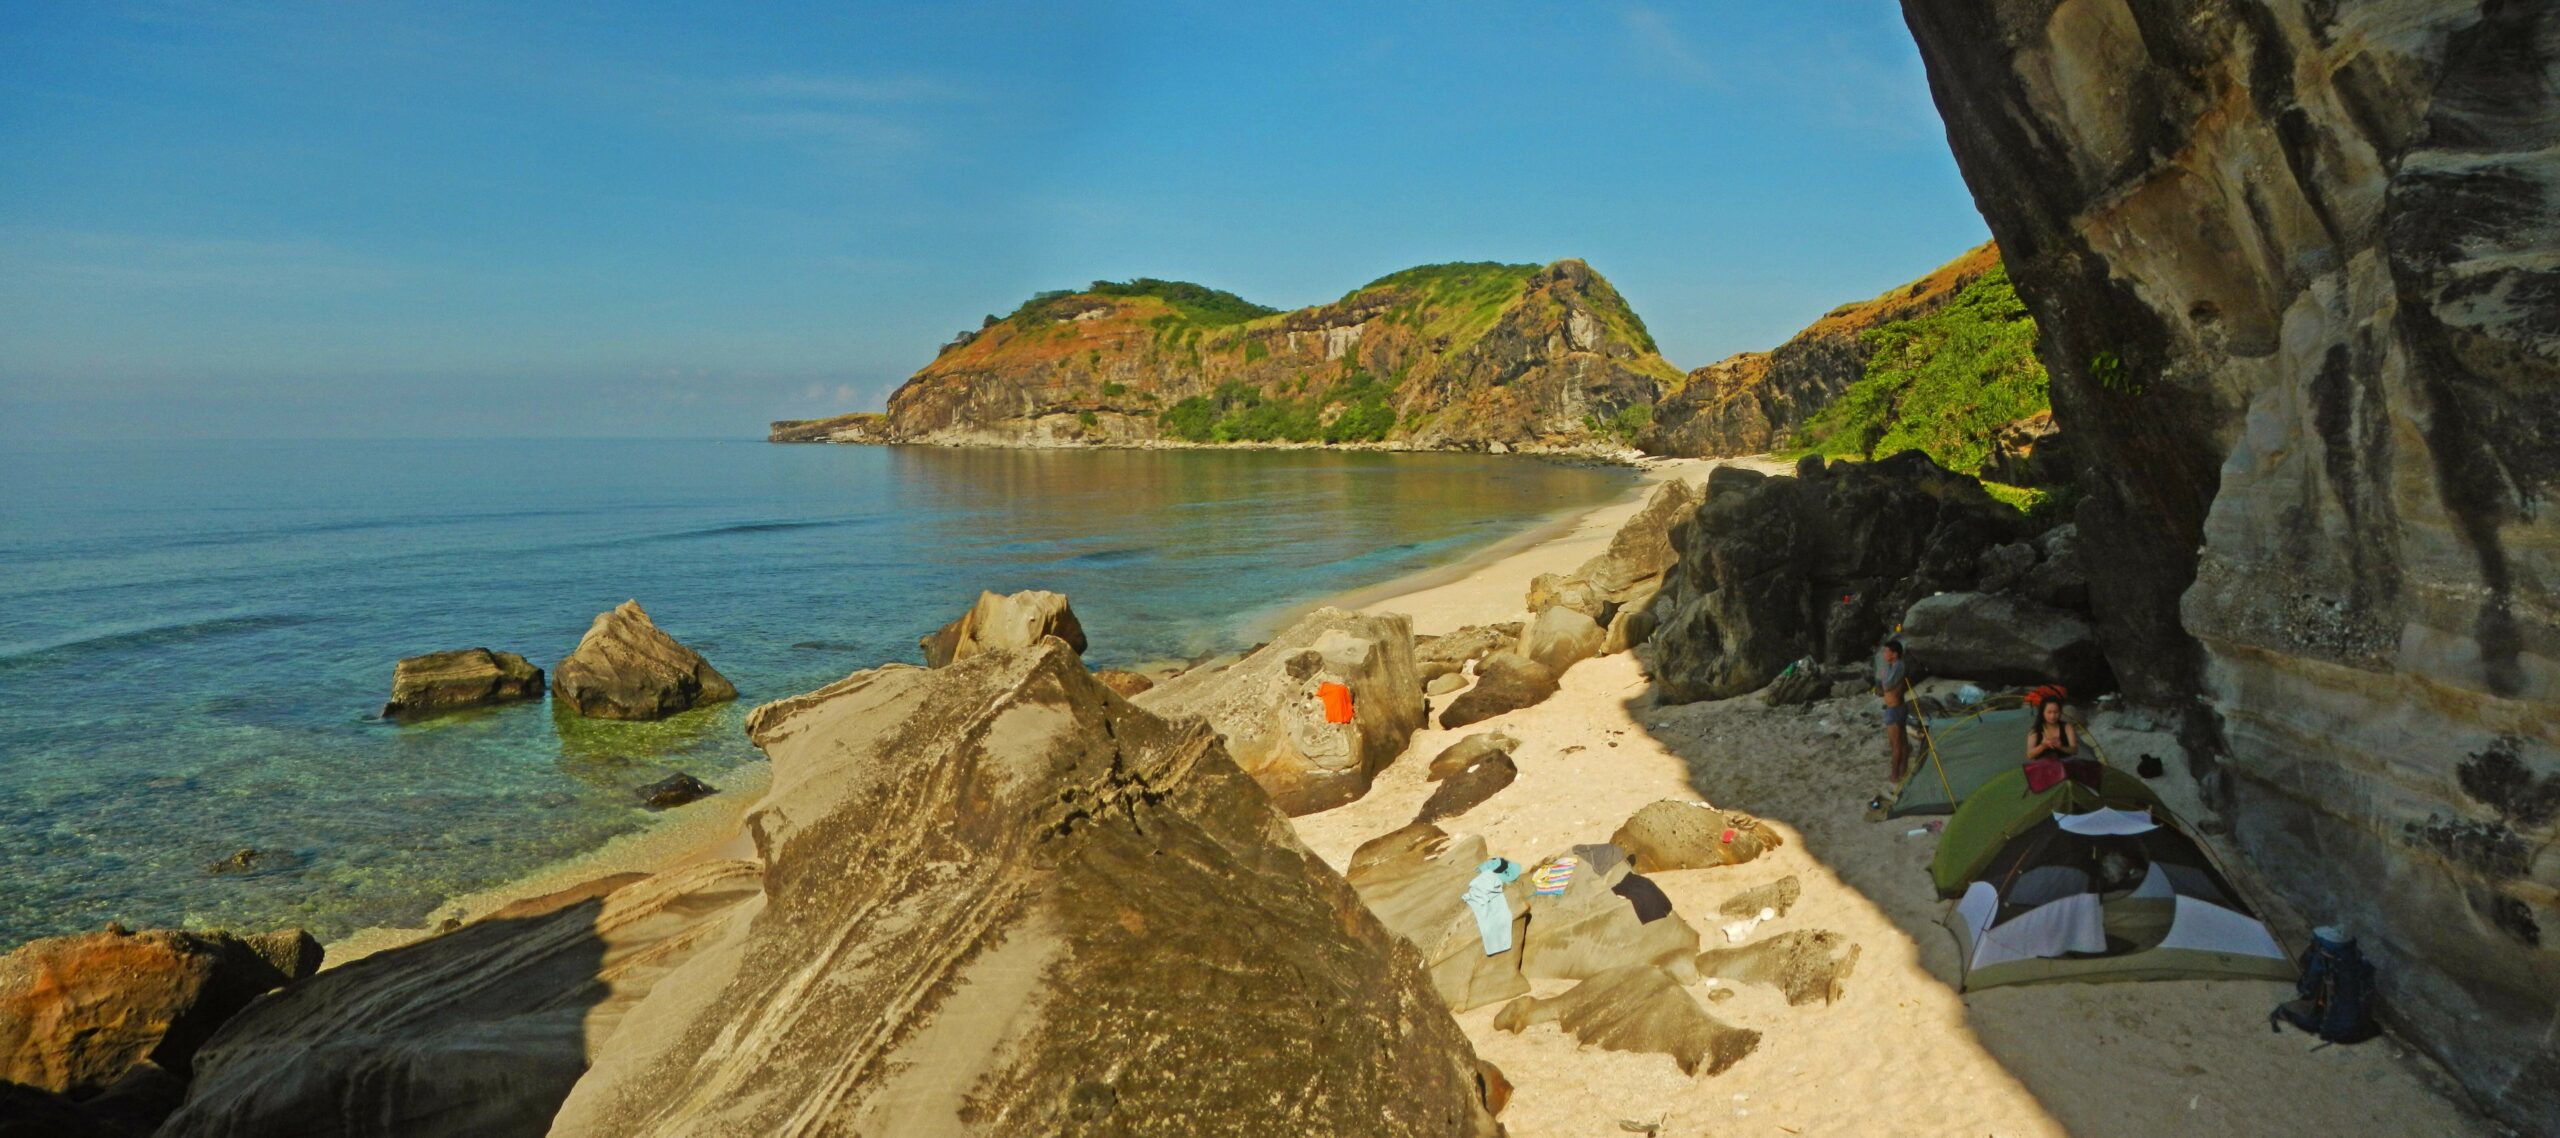 Things to do in Zambales - Capones Island - beach and rock formations